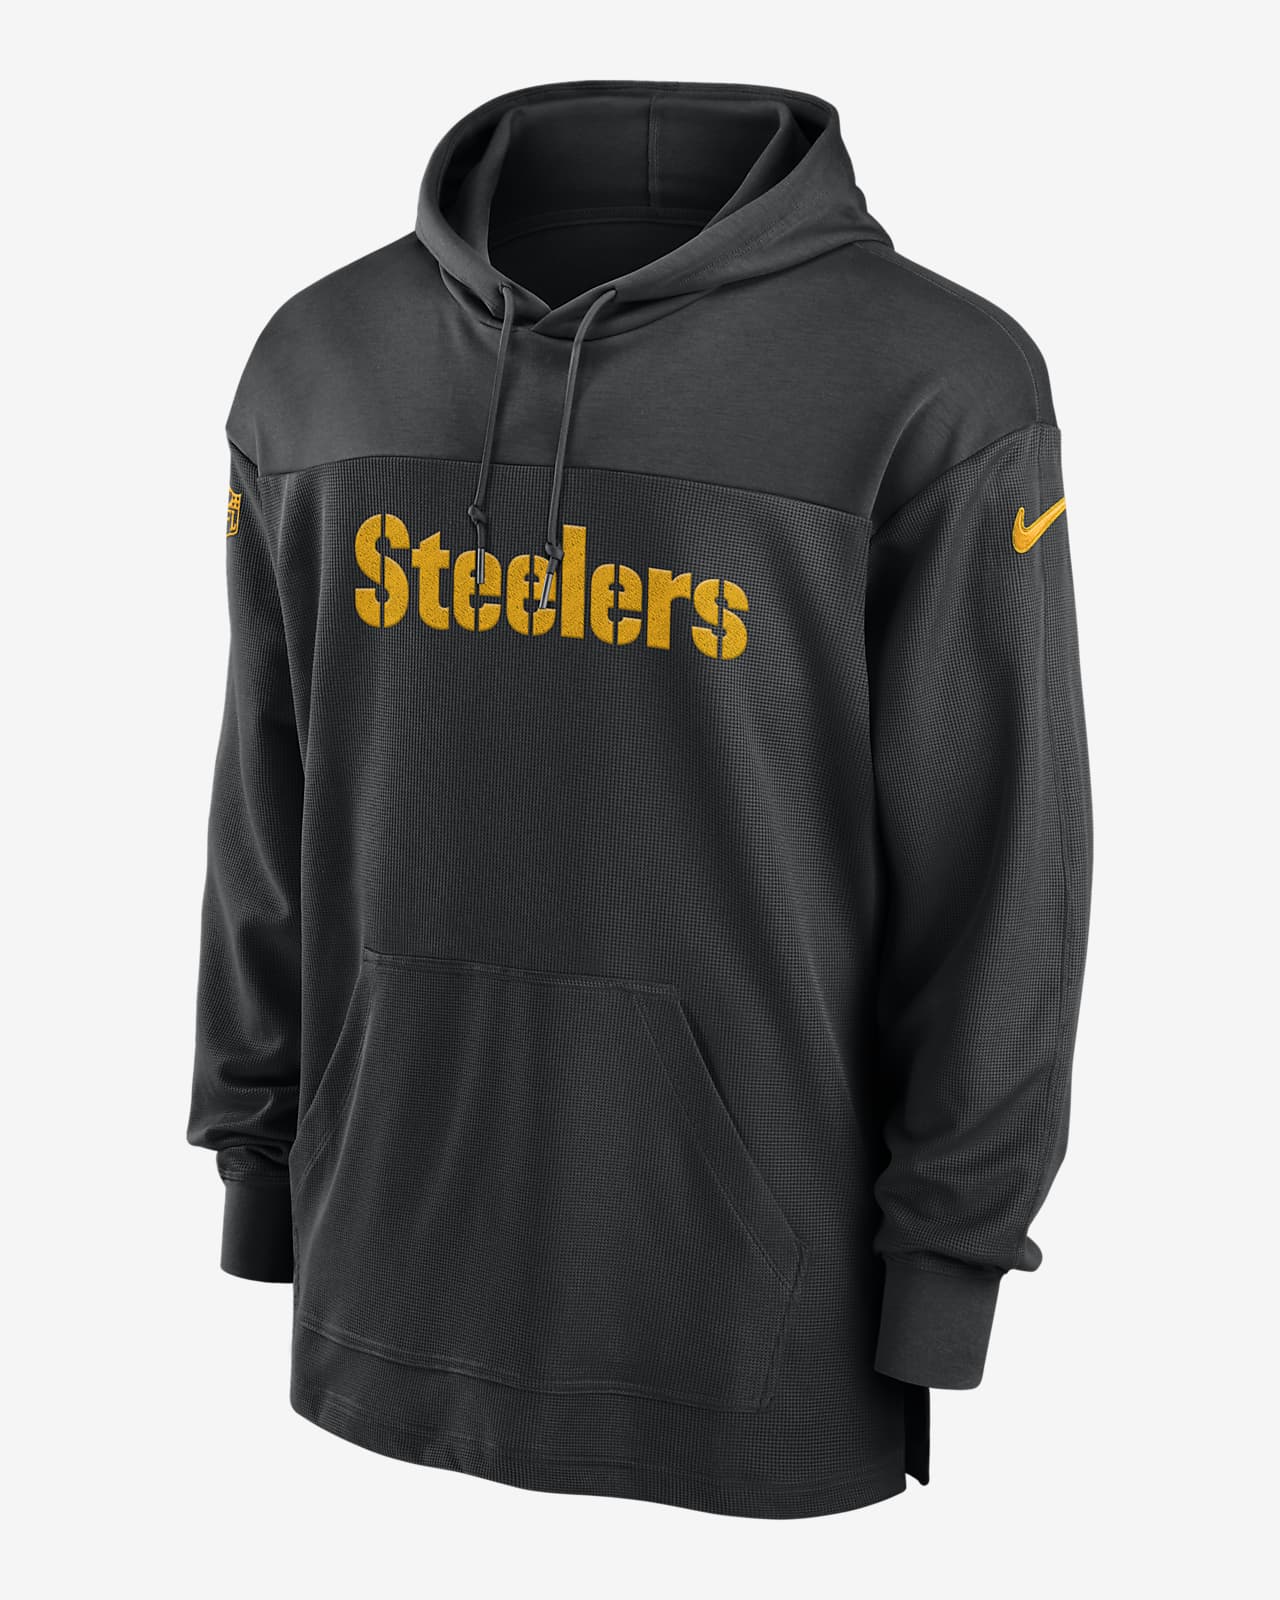 Pittsburgh Steelers Sideline Nike Men's Dri-Fit NFL Long-Sleeve Hooded Top in Black, Size: Large | 00MO00A7L-BVK